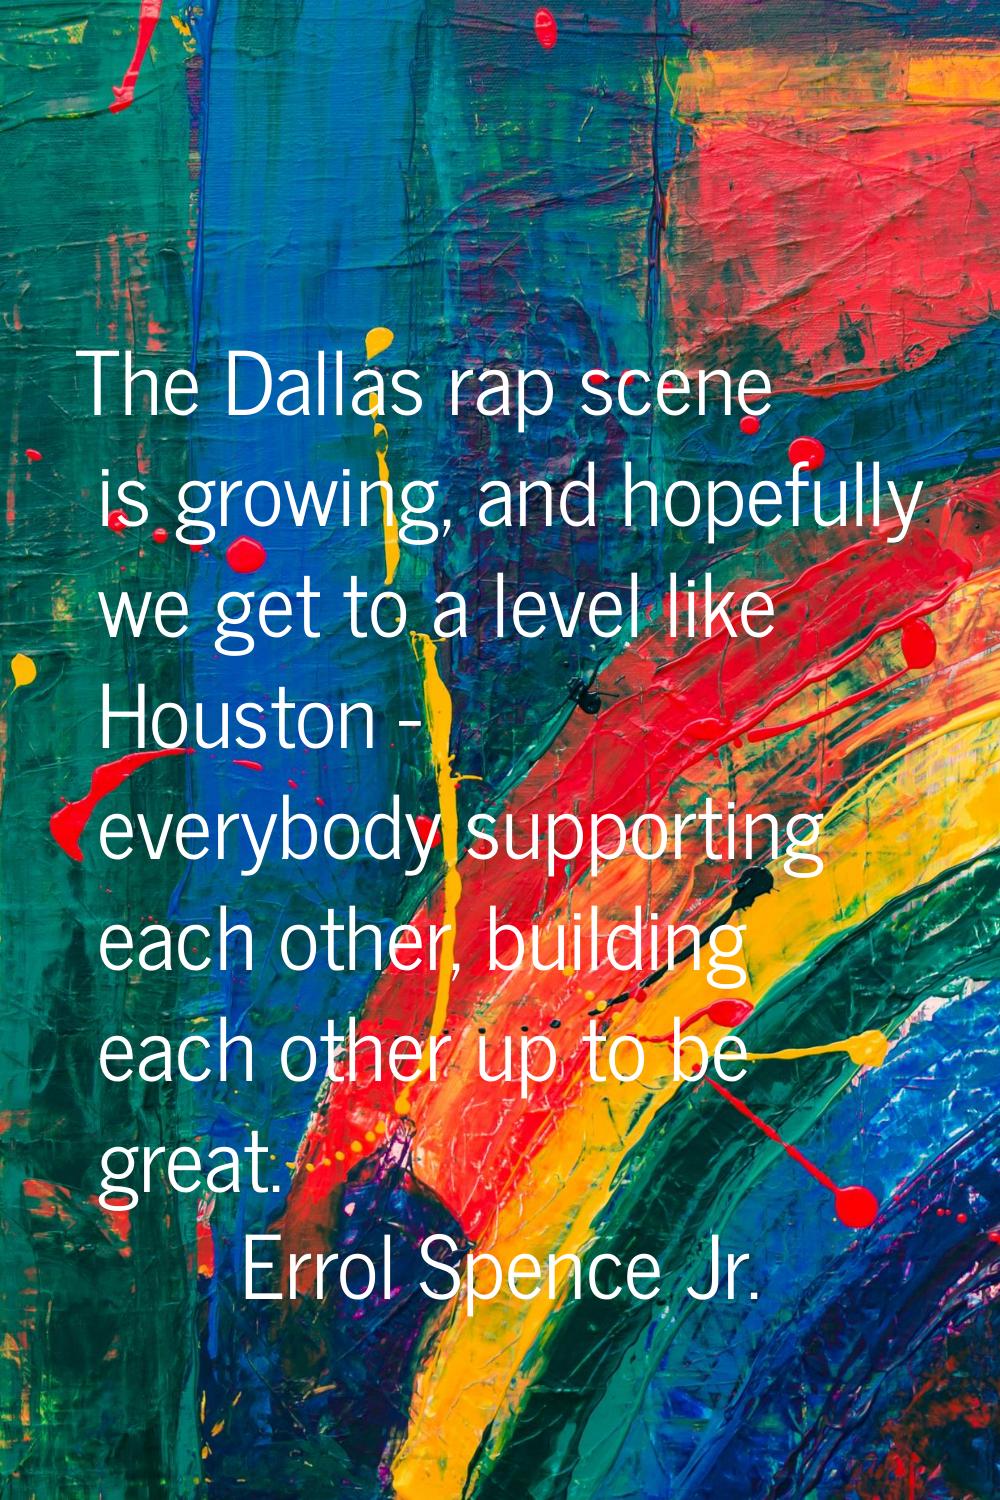 The Dallas rap scene is growing, and hopefully we get to a level like Houston - everybody supportin